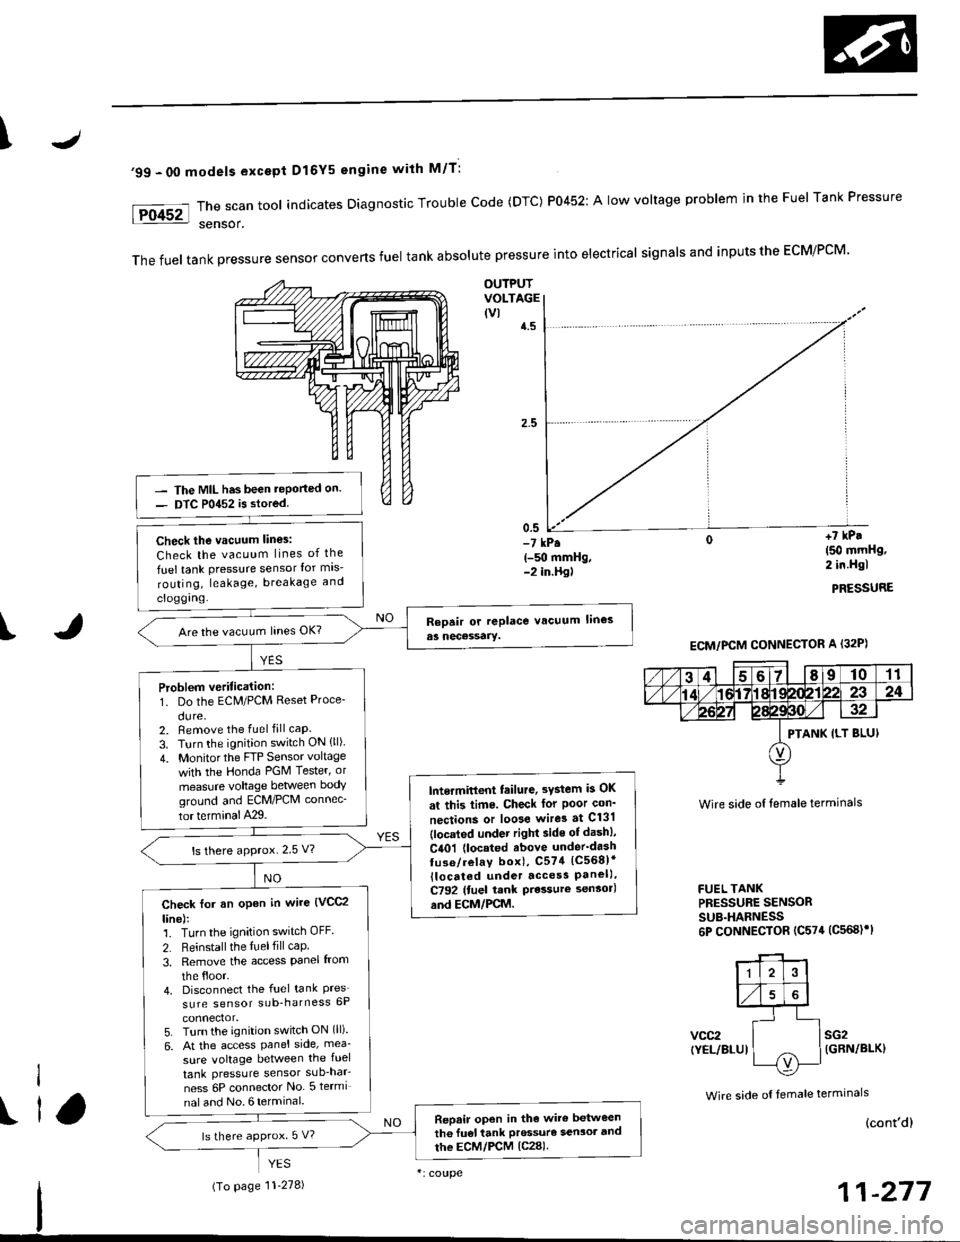 HONDA CIVIC 1998 6.G User Guide \
99 - 00 models excepi Dl6Y5 engine with M/T:
The scan tool indicates Diagnostic Trouble Code (DTC) P0452: A low voltage problem in the Fuel Tank Pressure
sensor.
The fuel tank pressure sensor conve